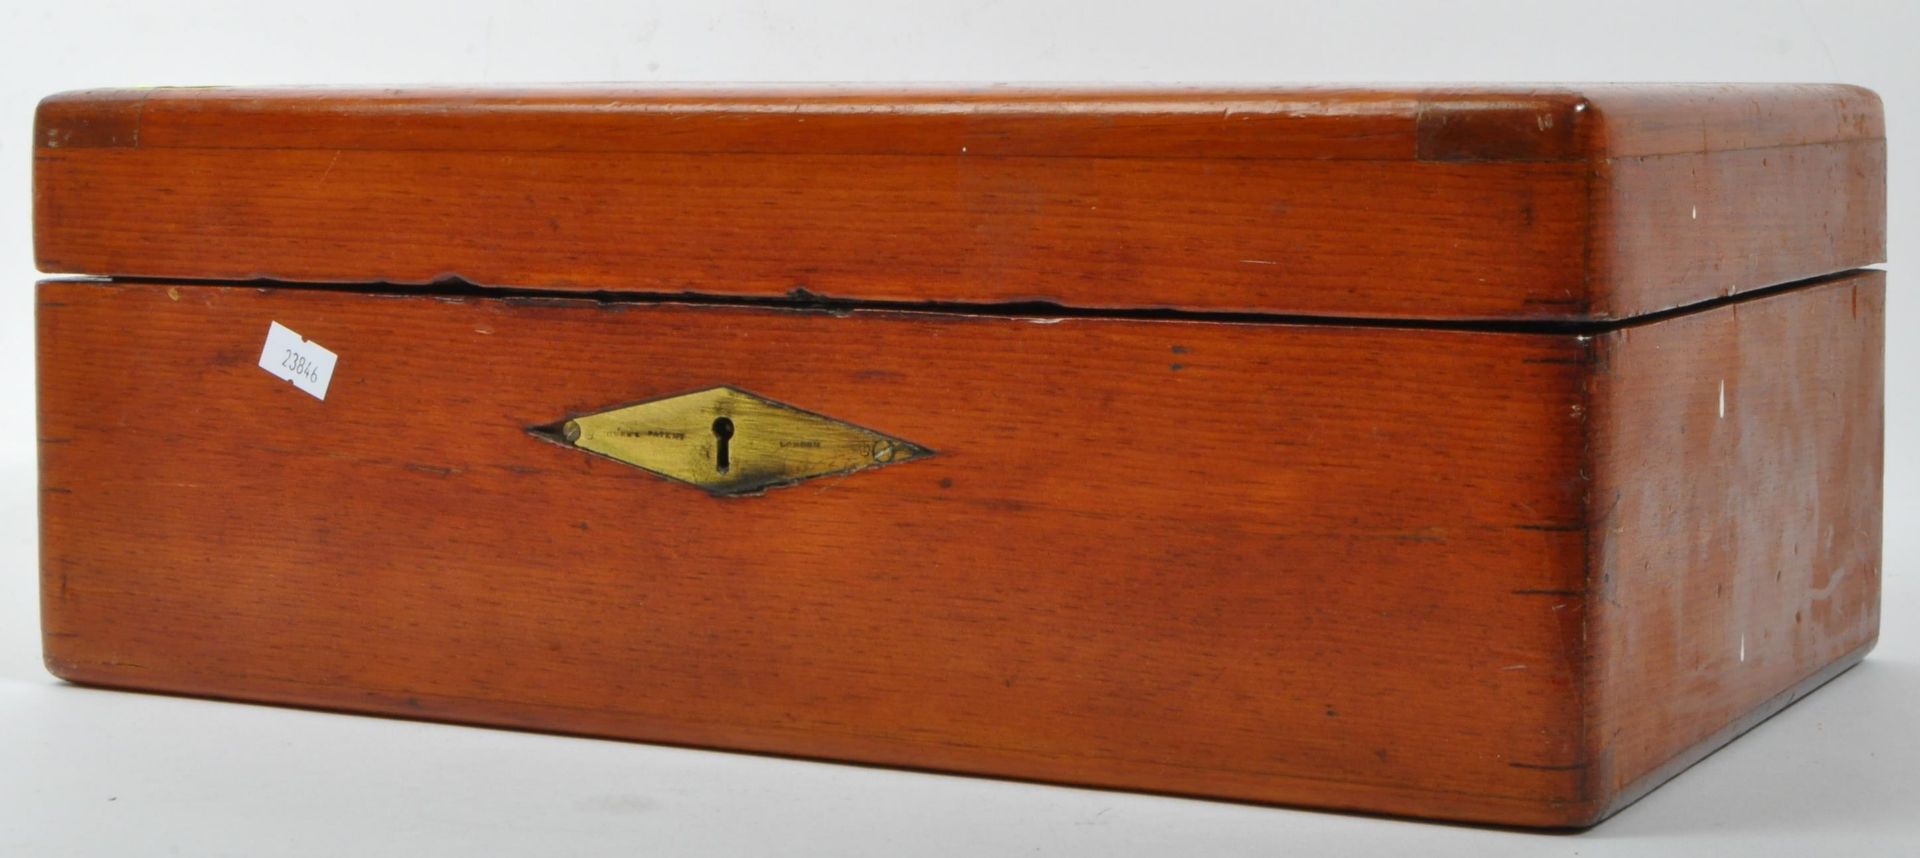 EARLY 20TH CENTURY WOODEN WRITING SLOPE - CHUBB & SONS